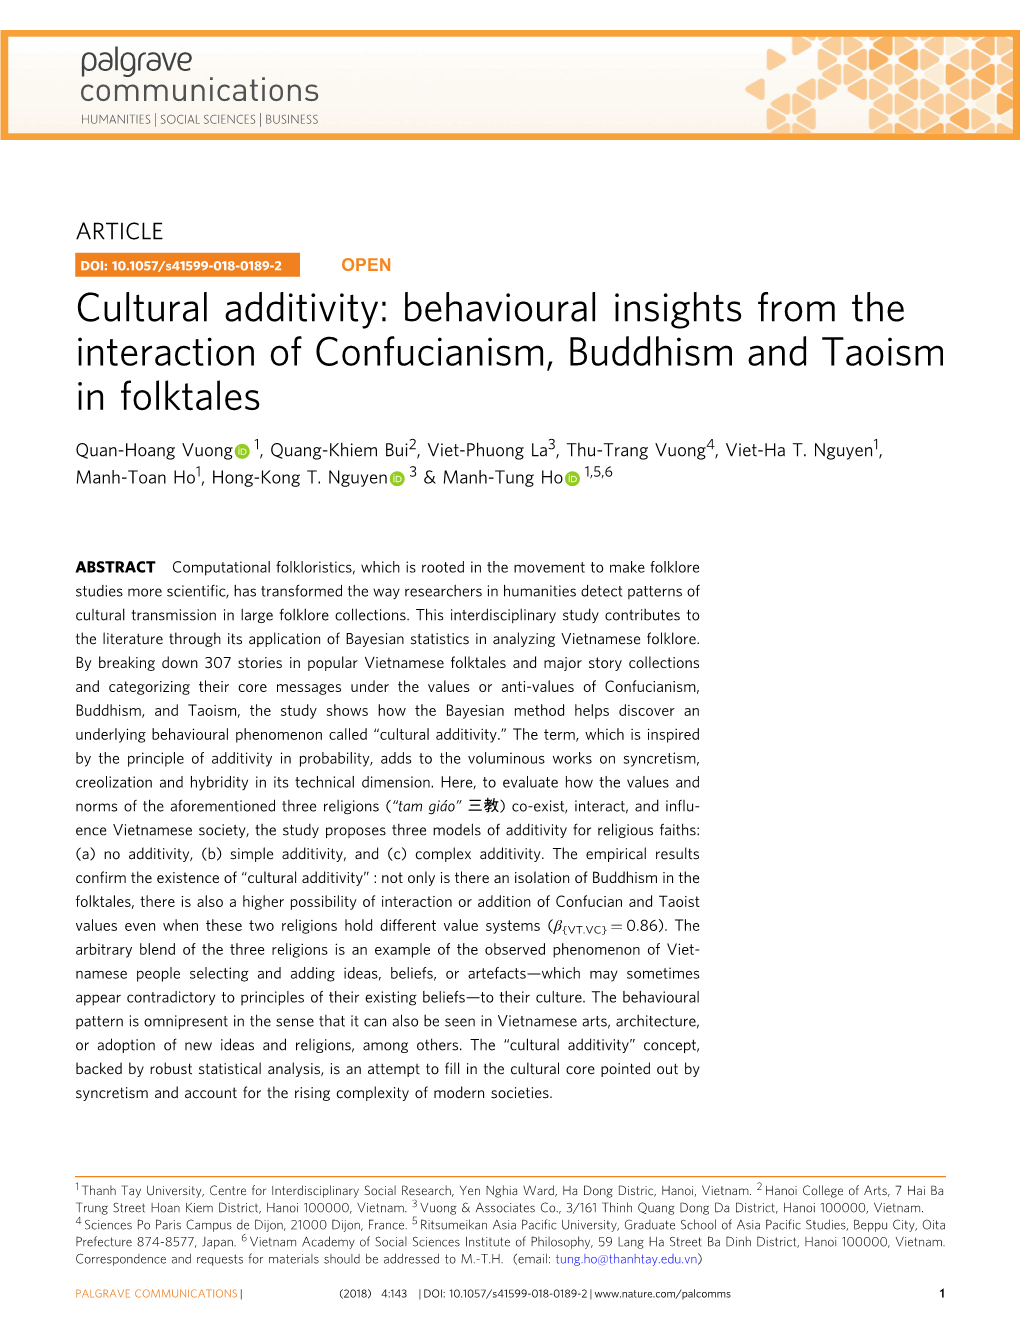 Cultural Additivity: Behavioural Insights from the Interaction of Confucianism, Buddhism and Taoism in Folktales